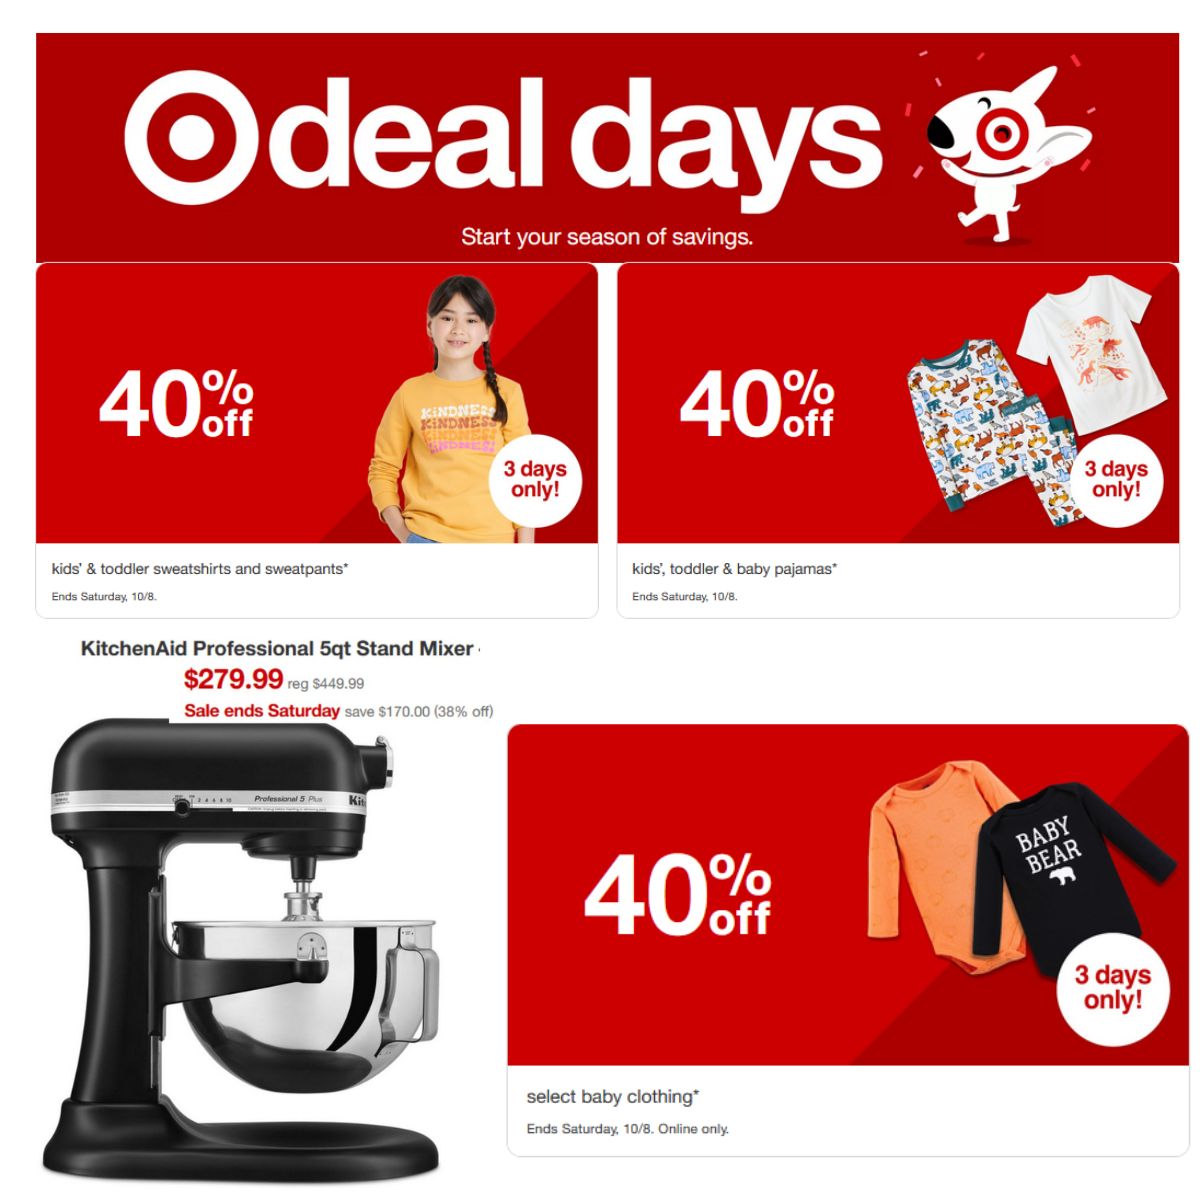 3 days of Early Black Friday deals at Target - HUGE savings on